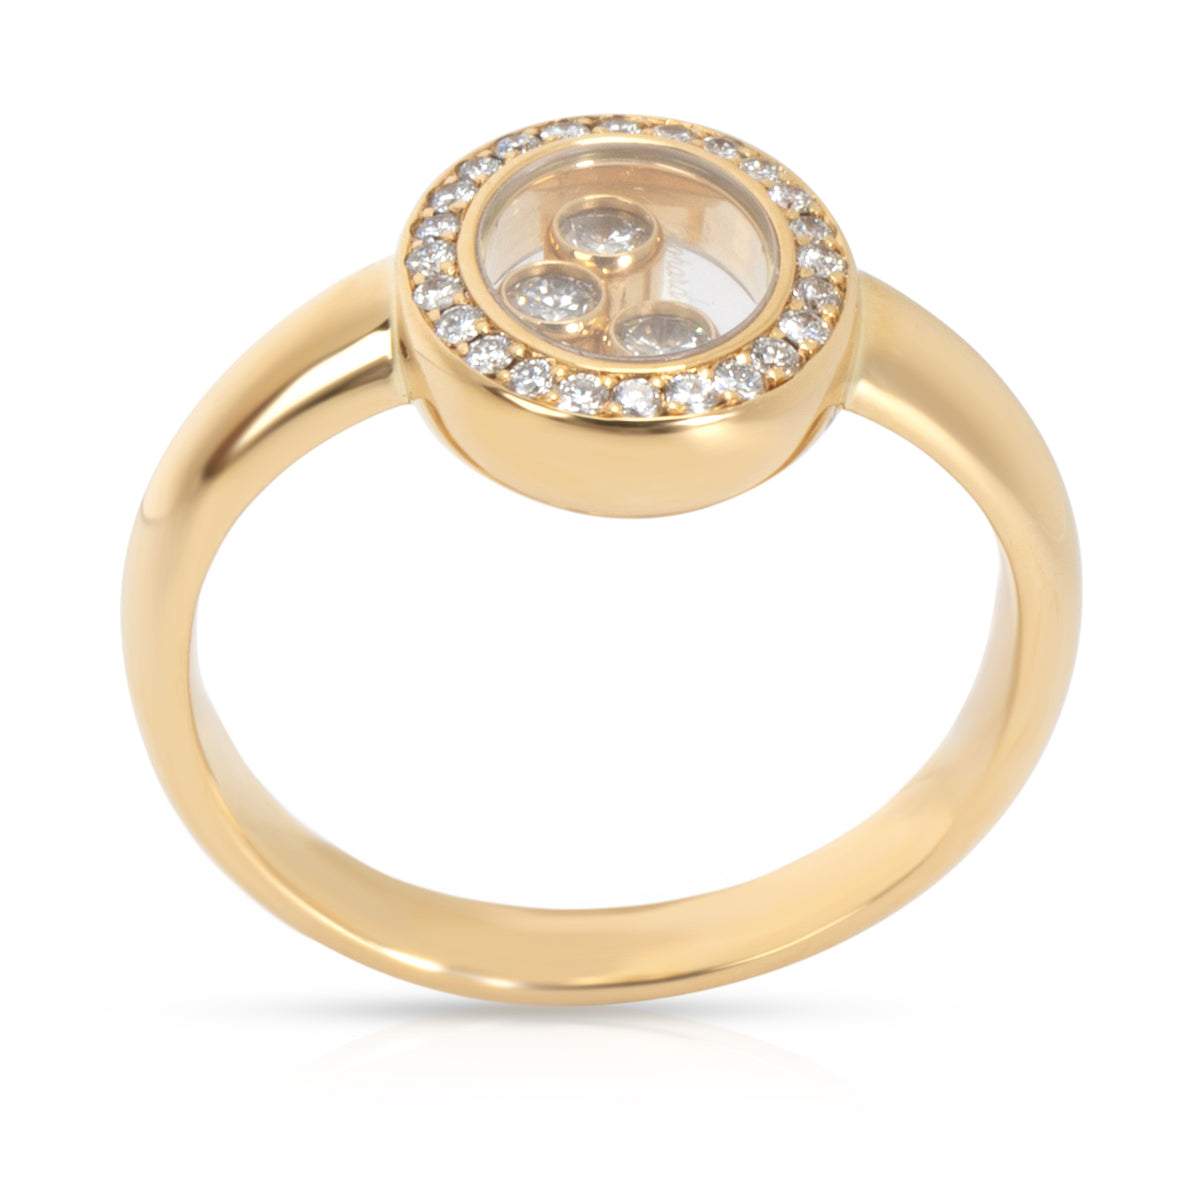 Chopard Happy Oval Diamond Ring in 18K Yellow Gold 0.23 CTW